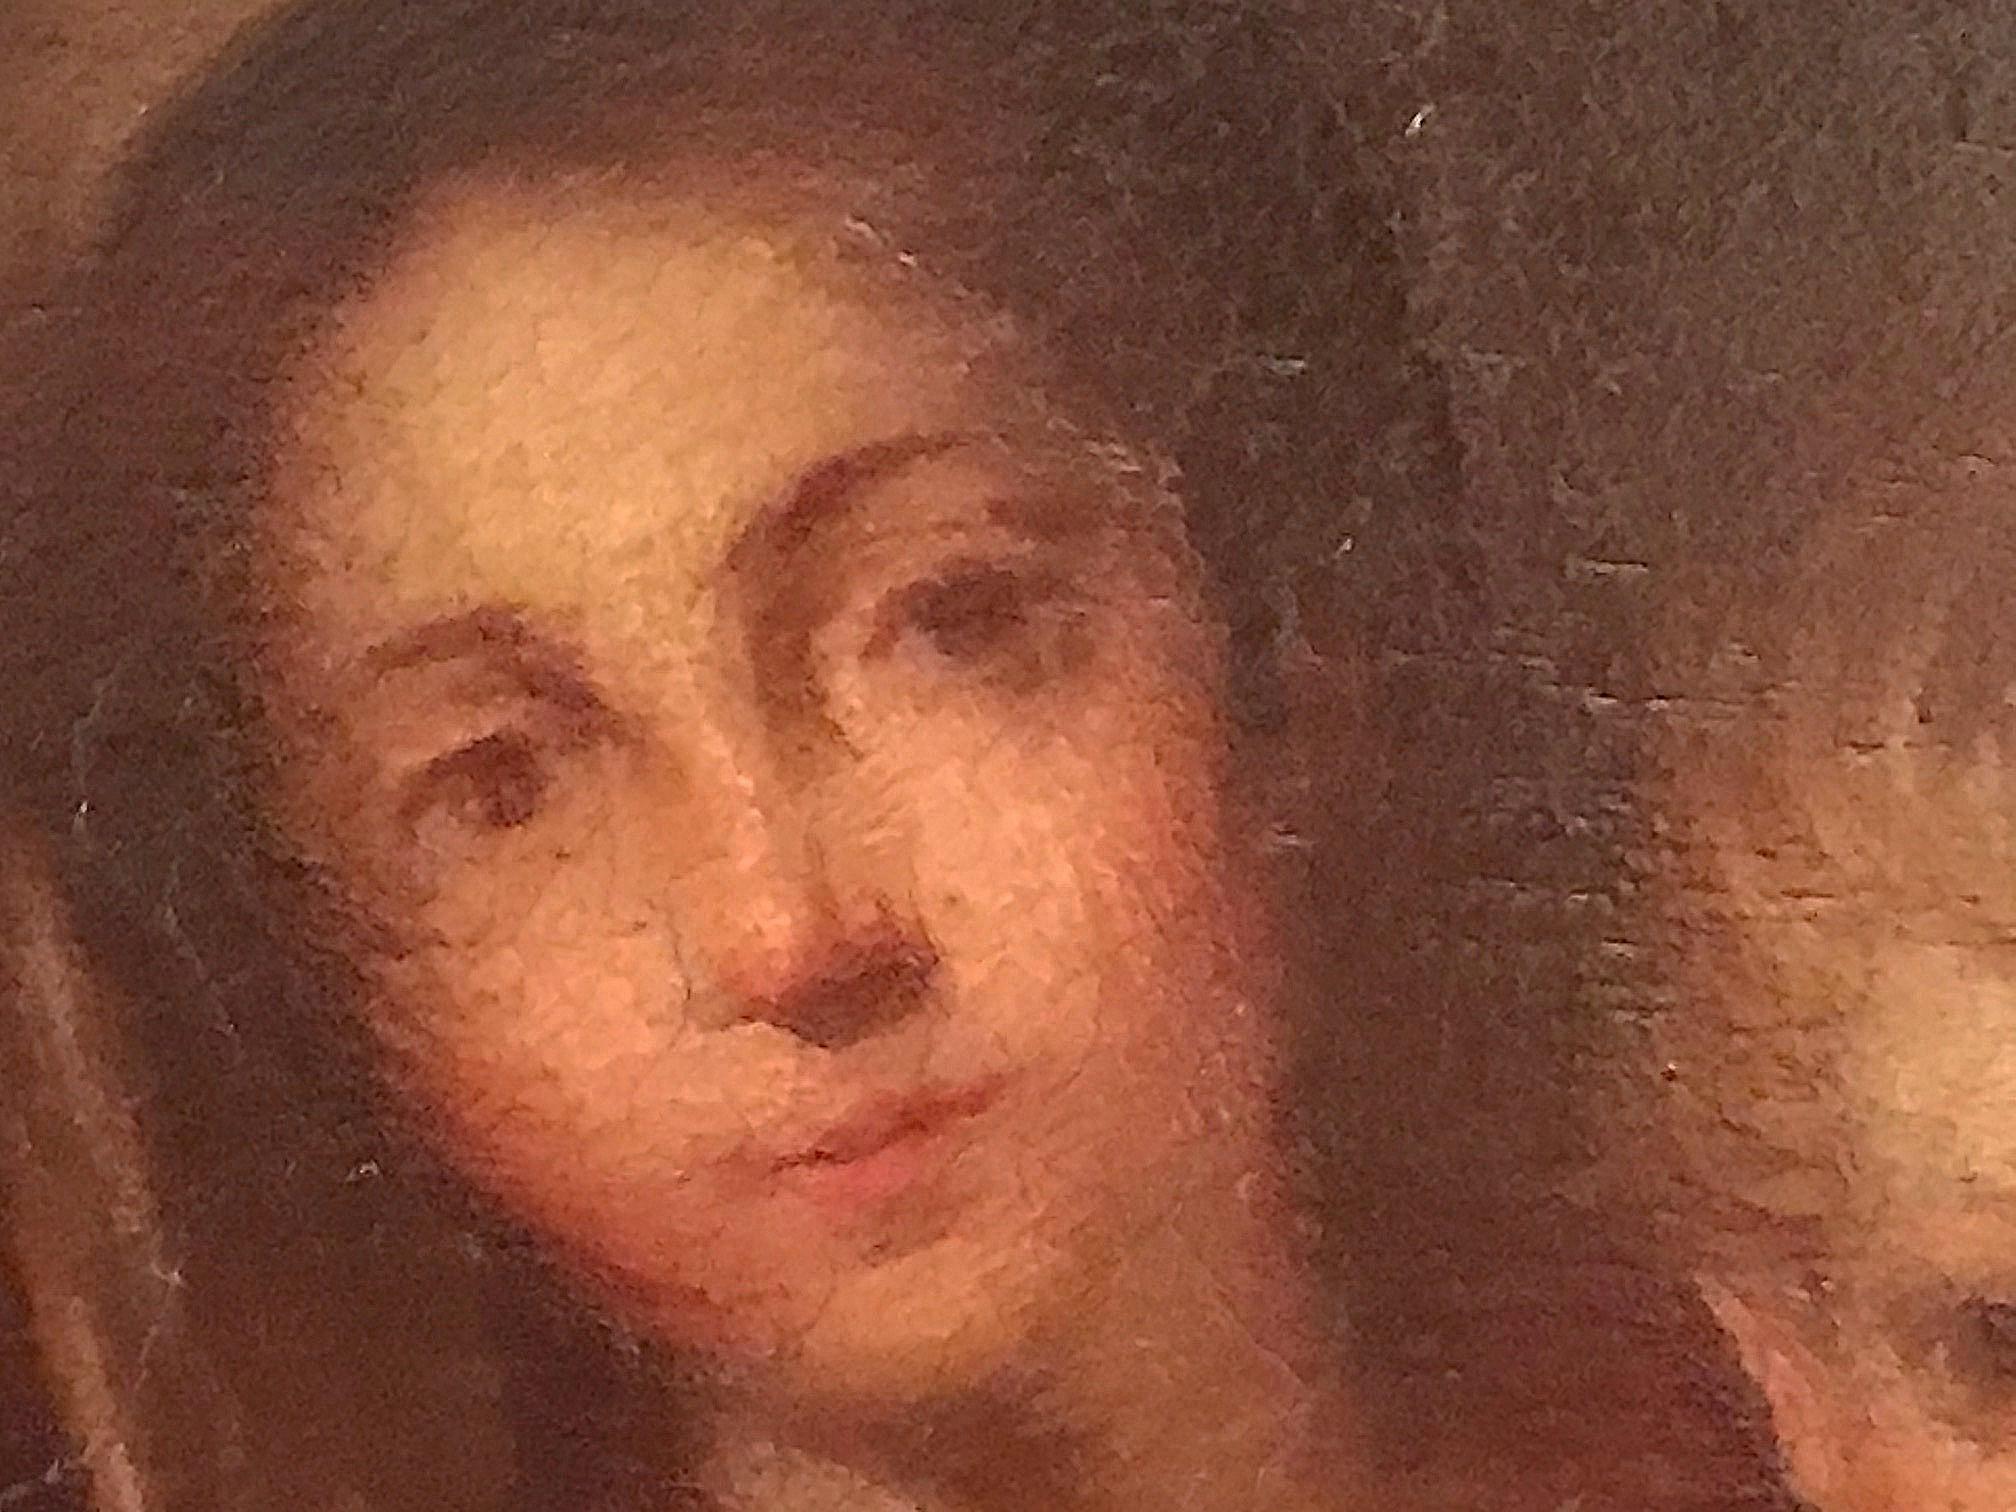 Antique painting “Madonna with a Napkin” after Bartolome Esteban Murillo, 1666

This lovely oil painting on beveled wood panel is after the famous Spanish Baroque painting “Madonna with a Napkin” by Murillo. The original is in the Museo Nacional del